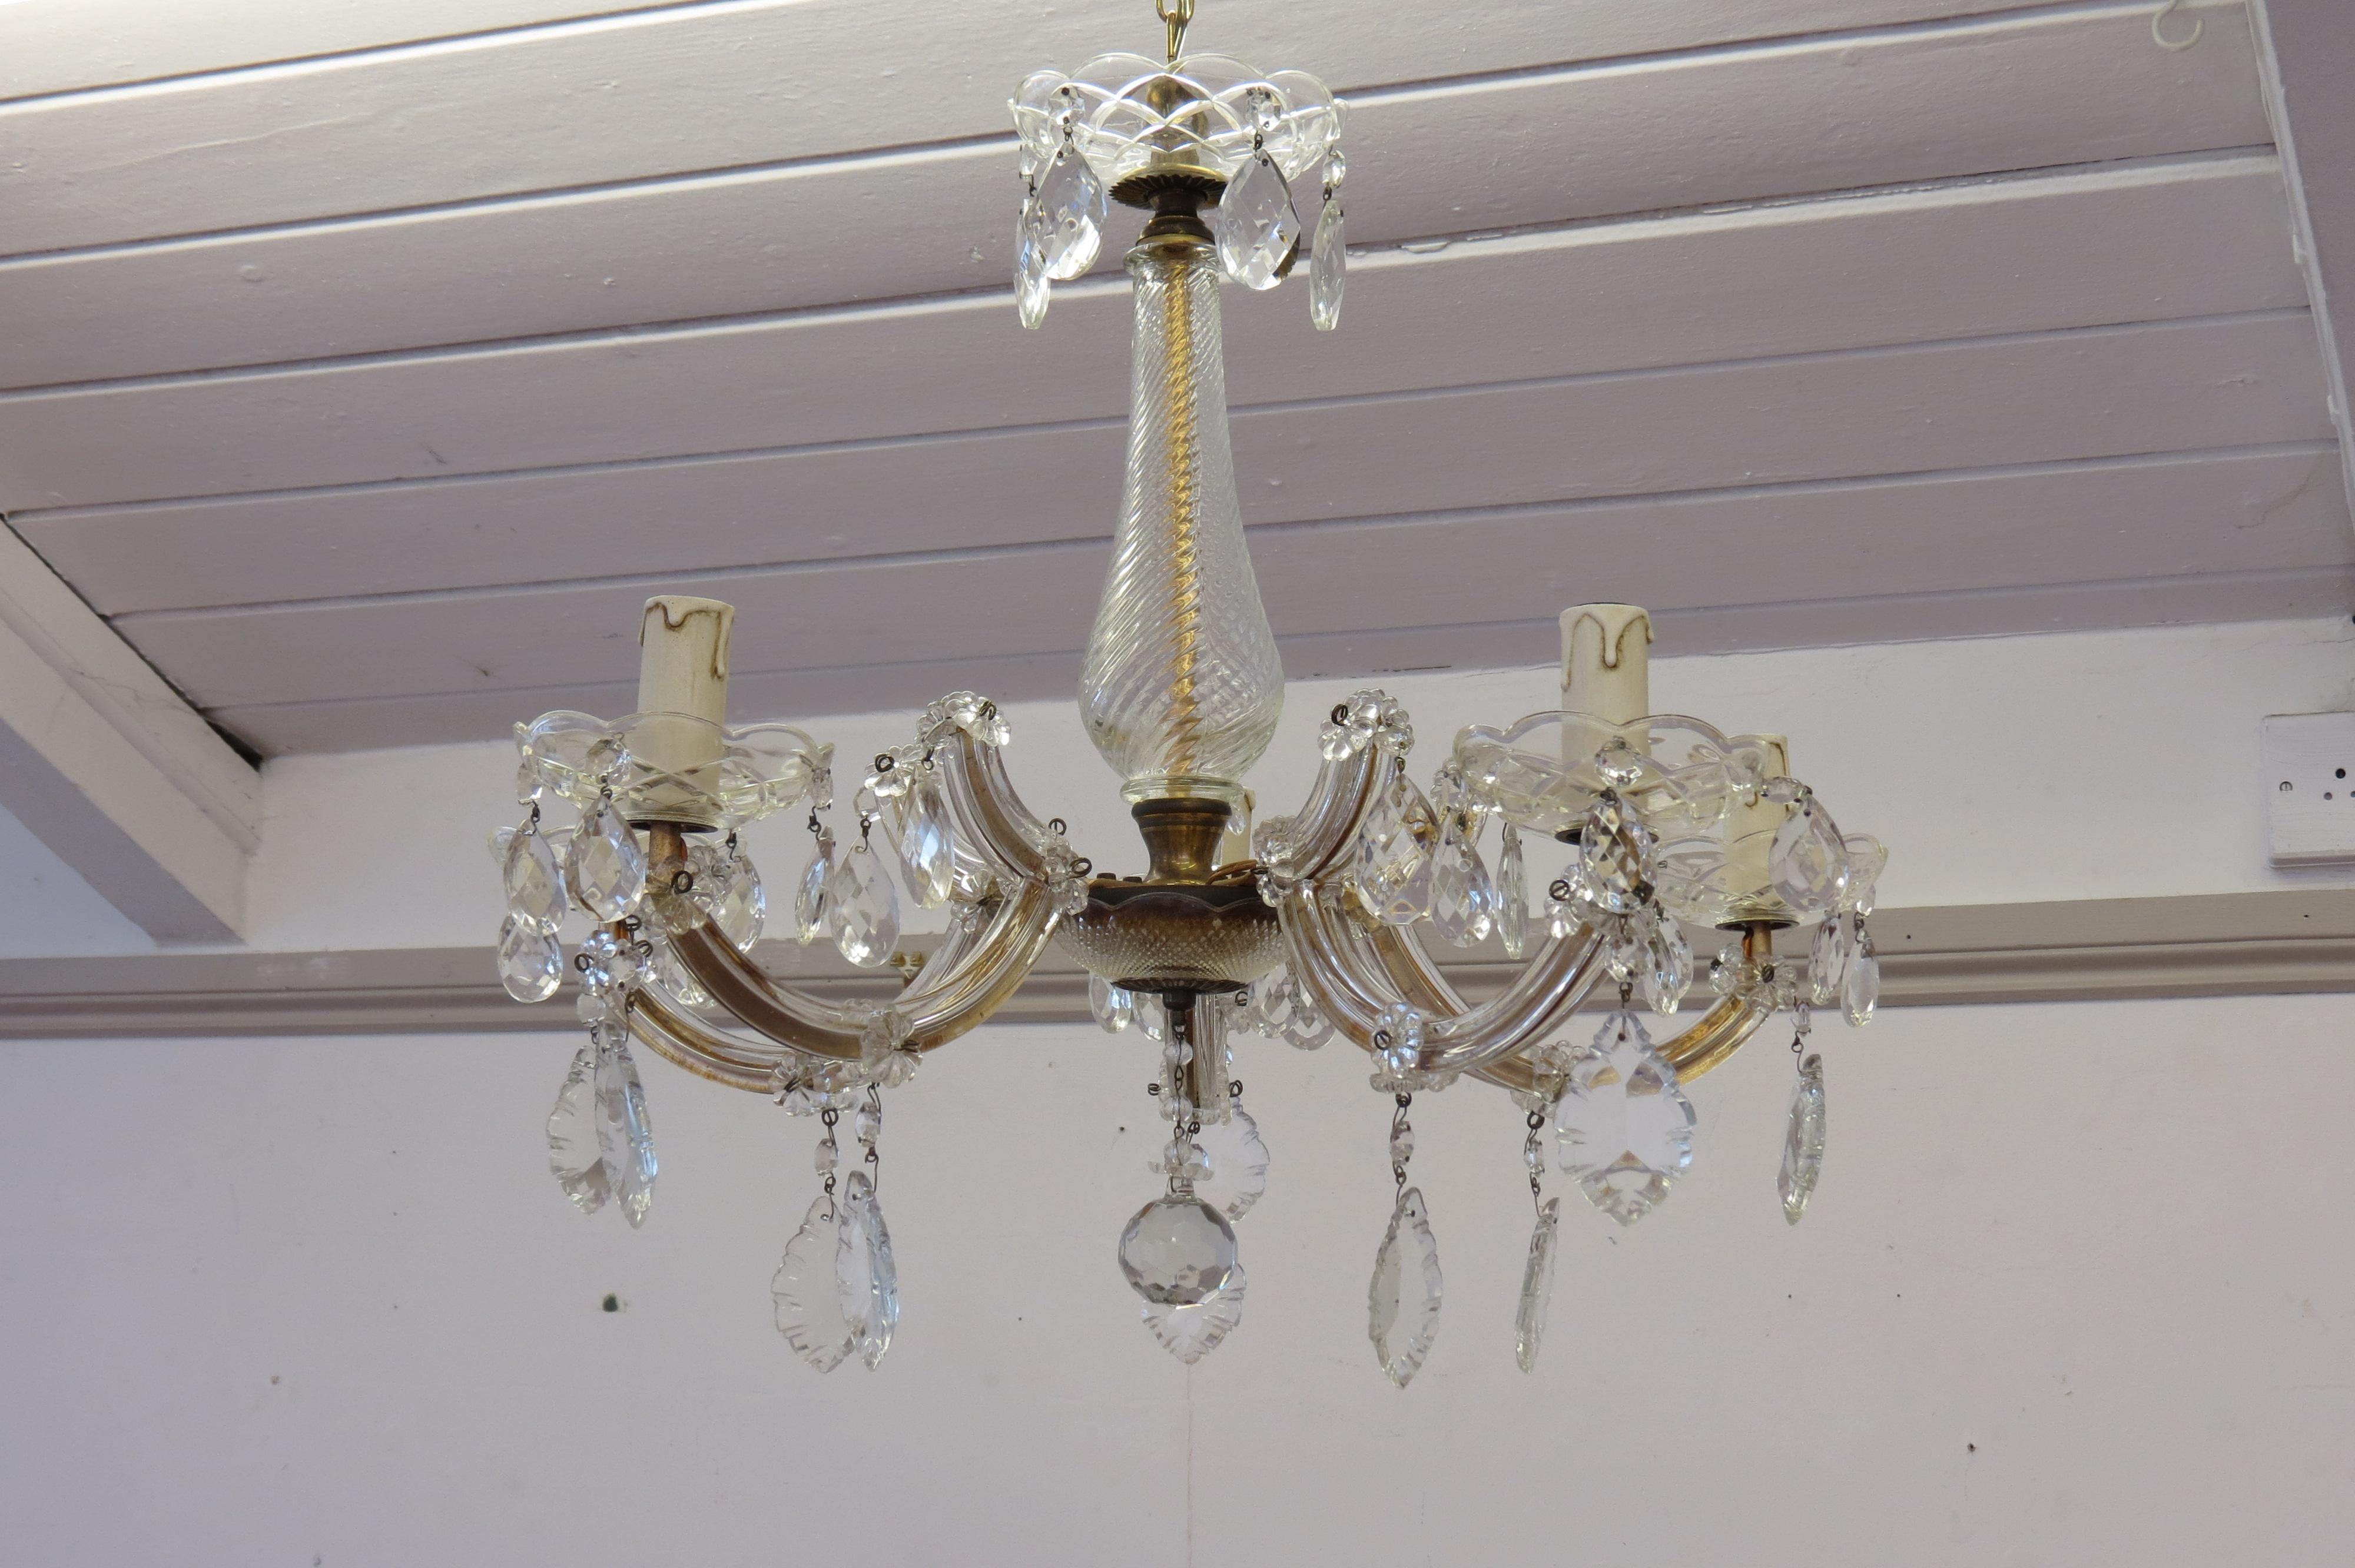 5-light Maria Theresia chandelier, 1950s
Metal frame with brass, glass crystal leaves and glass pears. 
Fully restored. 
